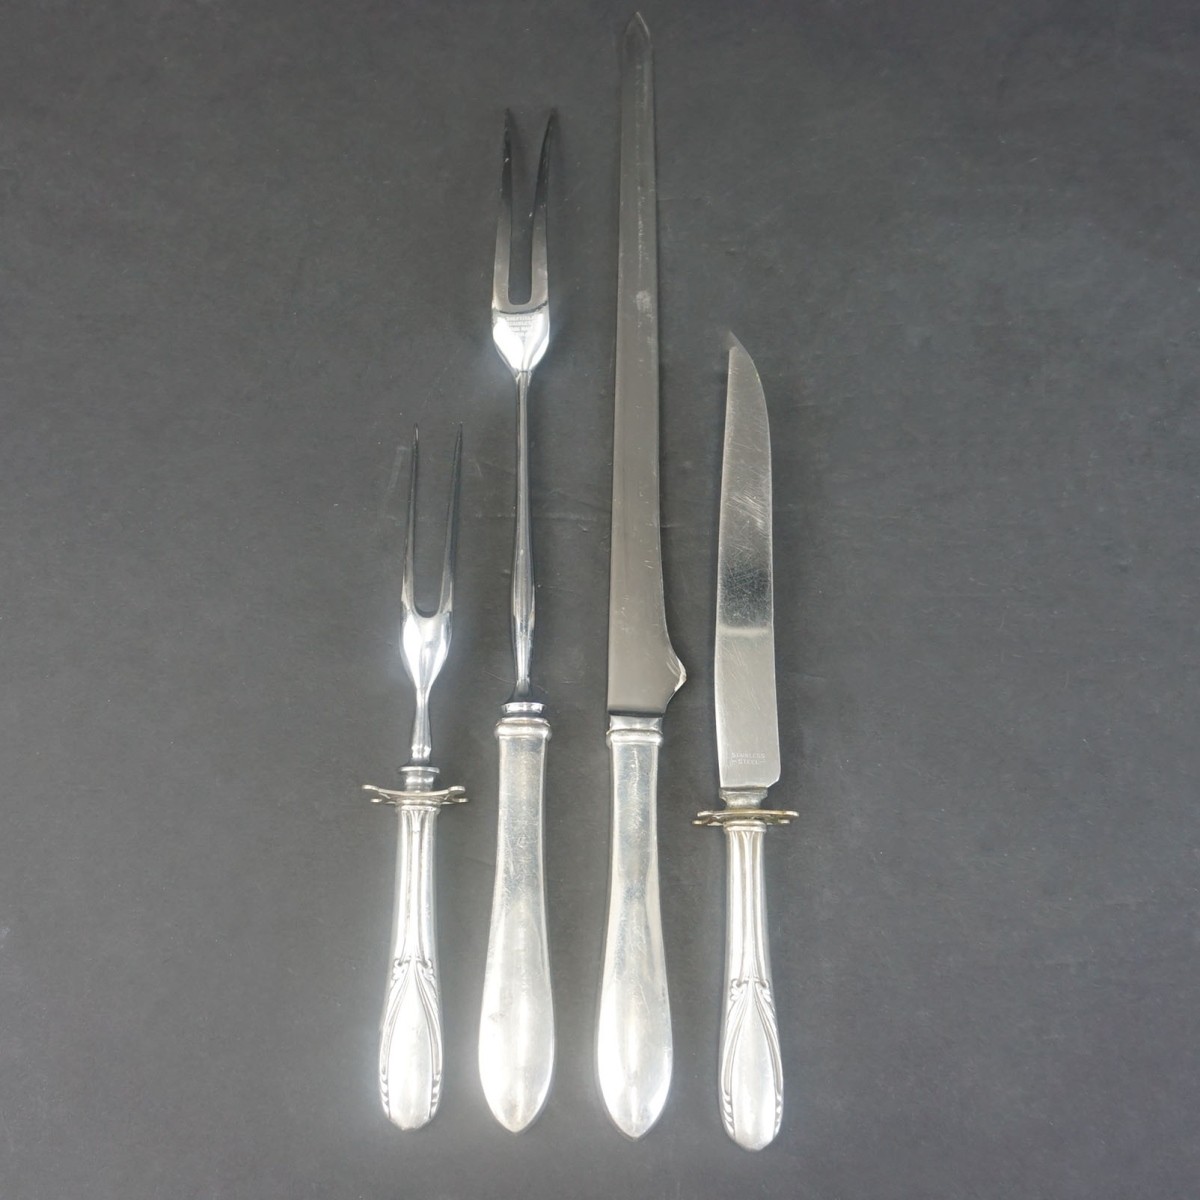 Silver Handle Carving Sets